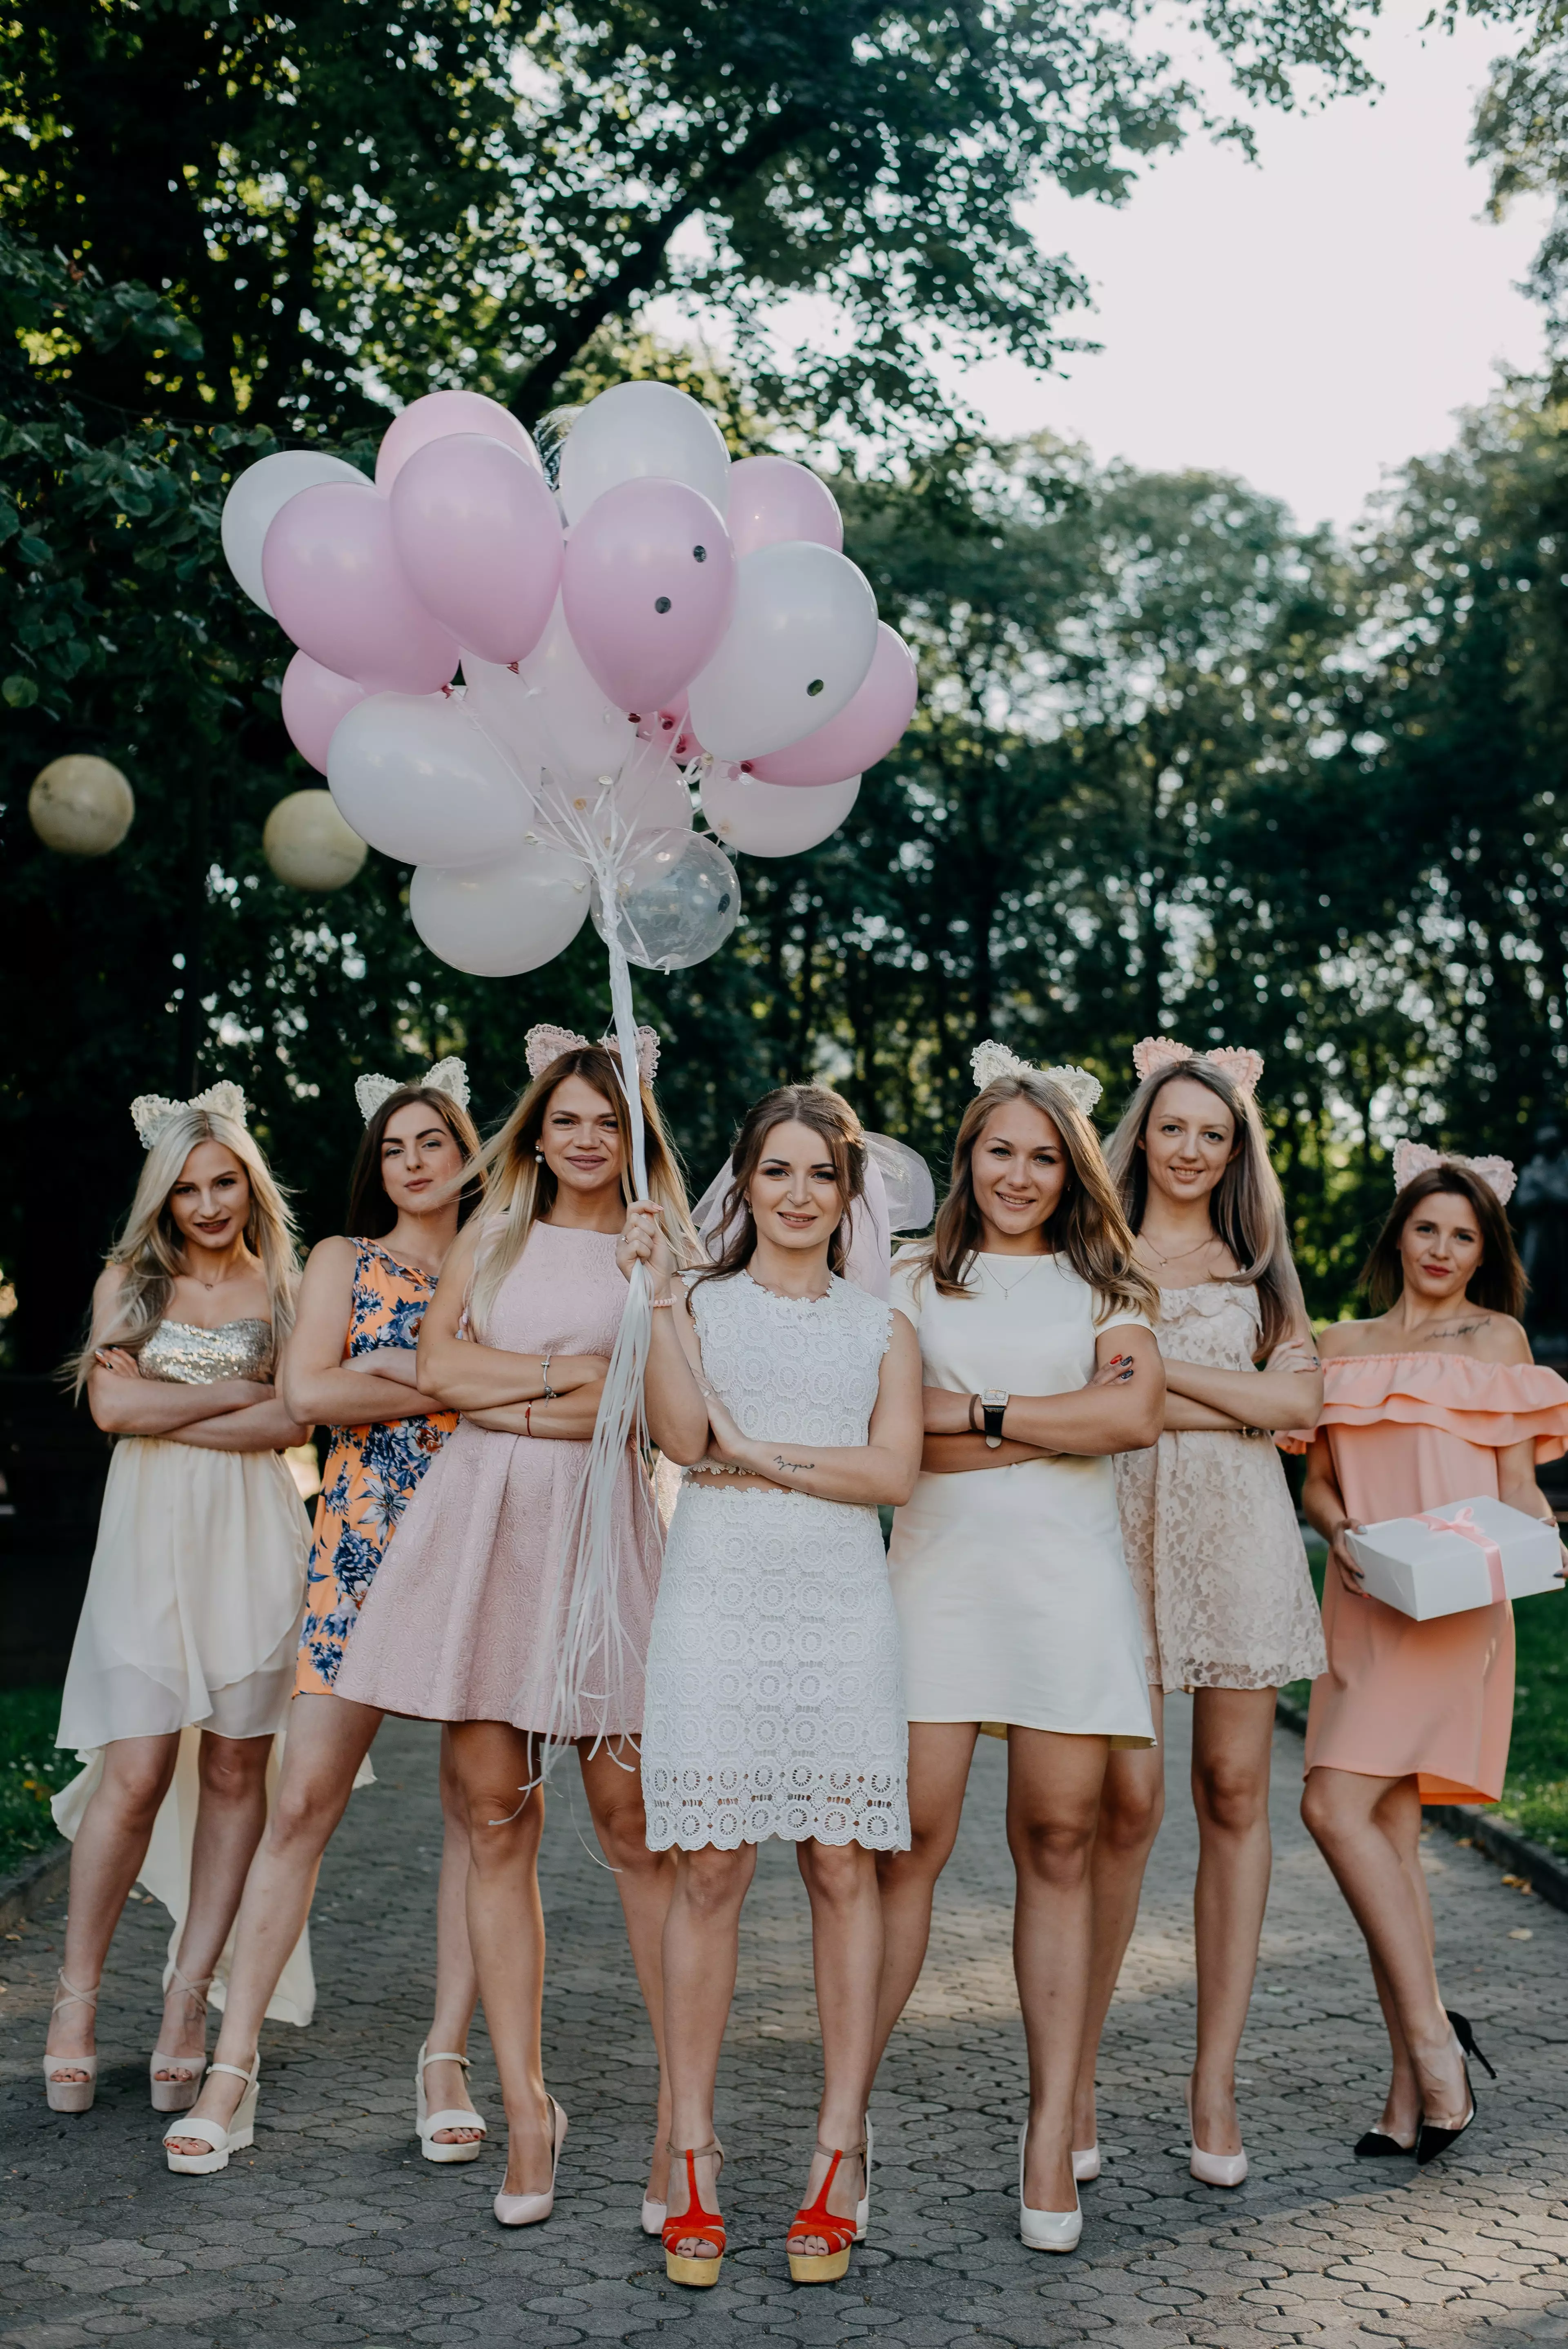 A number of the bridal party bowed out (